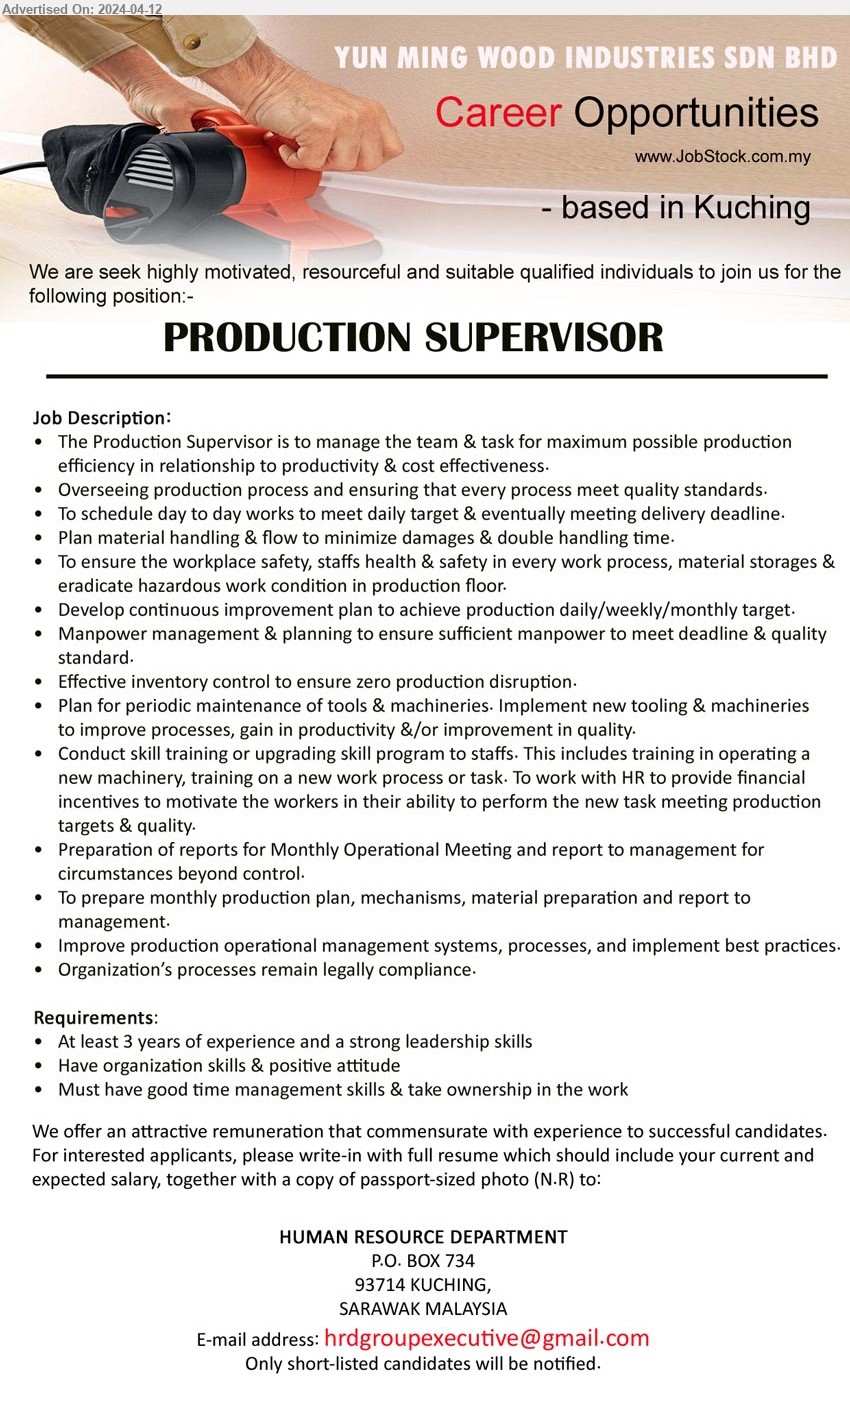 YUN MING WOOD INDUSTRIES SDN BHD - PRODUCTION SUPERVISOR (Kuching), At least 3 years of experience and a strong leadership skills, Have organization skills & positive attitude,...
Email resume to ...